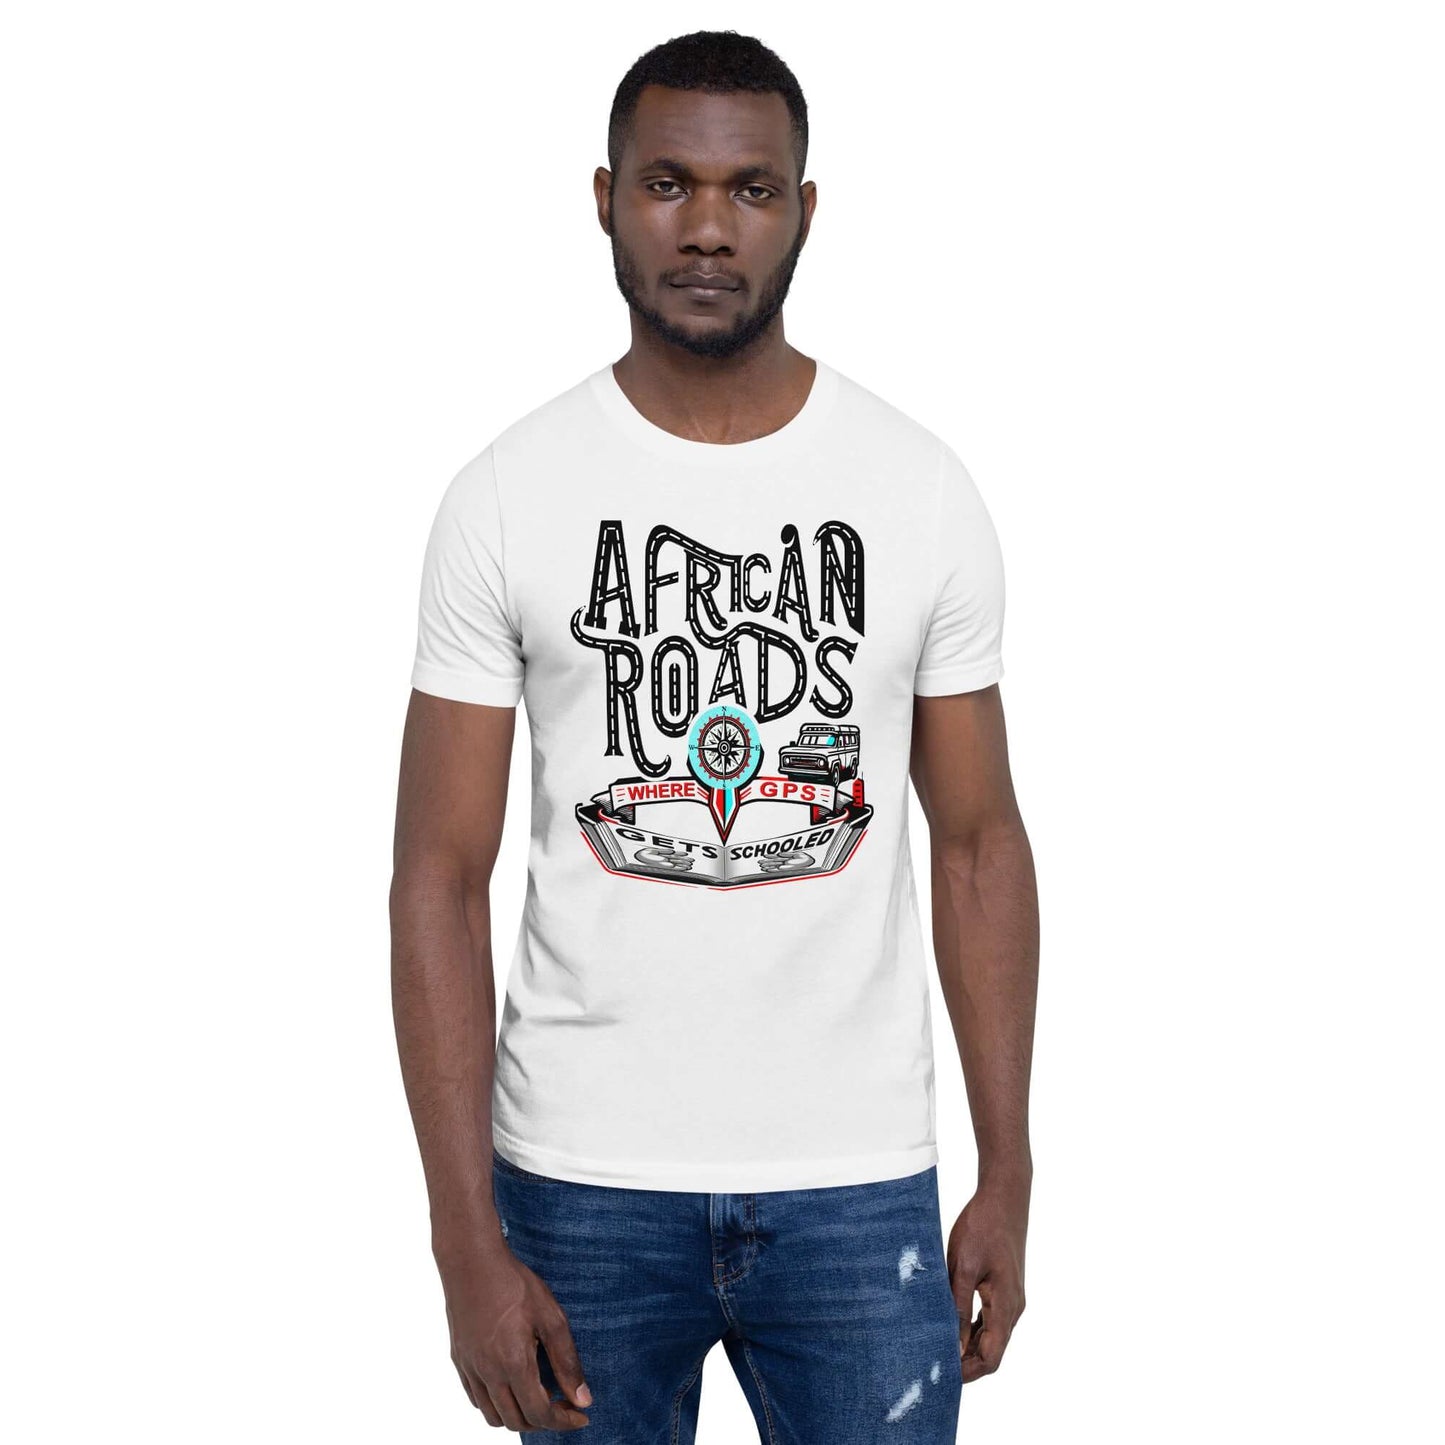 Playful Vector Graphic of African Roads on T-Shirt